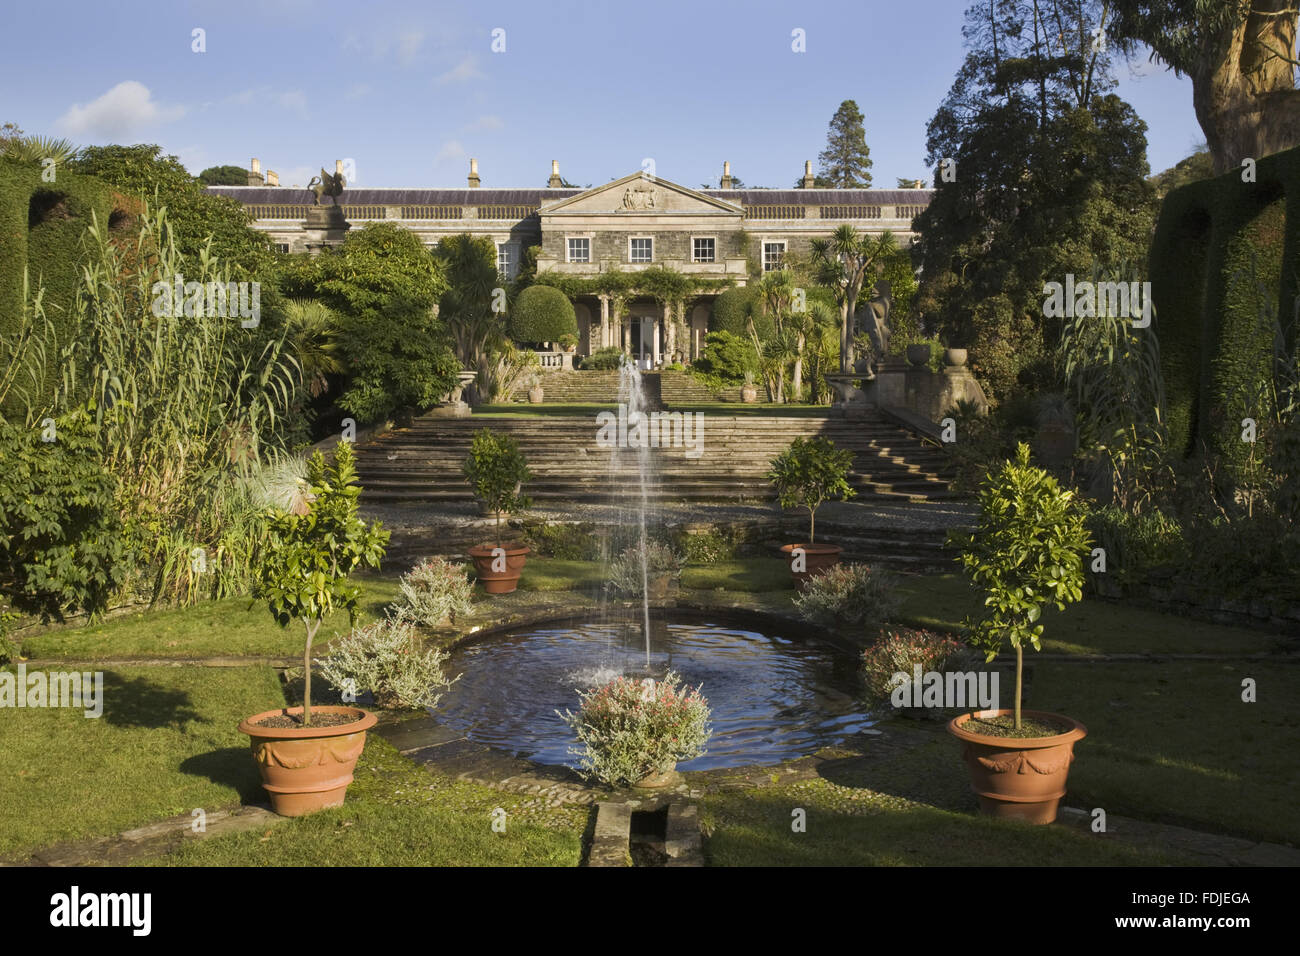 A view across the formal Italian Garden towards the nineteenth century house at Mount Stewart, Co. Down, Northern Ireland. Edith, Lady Londonderry created the garden in the 1920s. Stock Photo